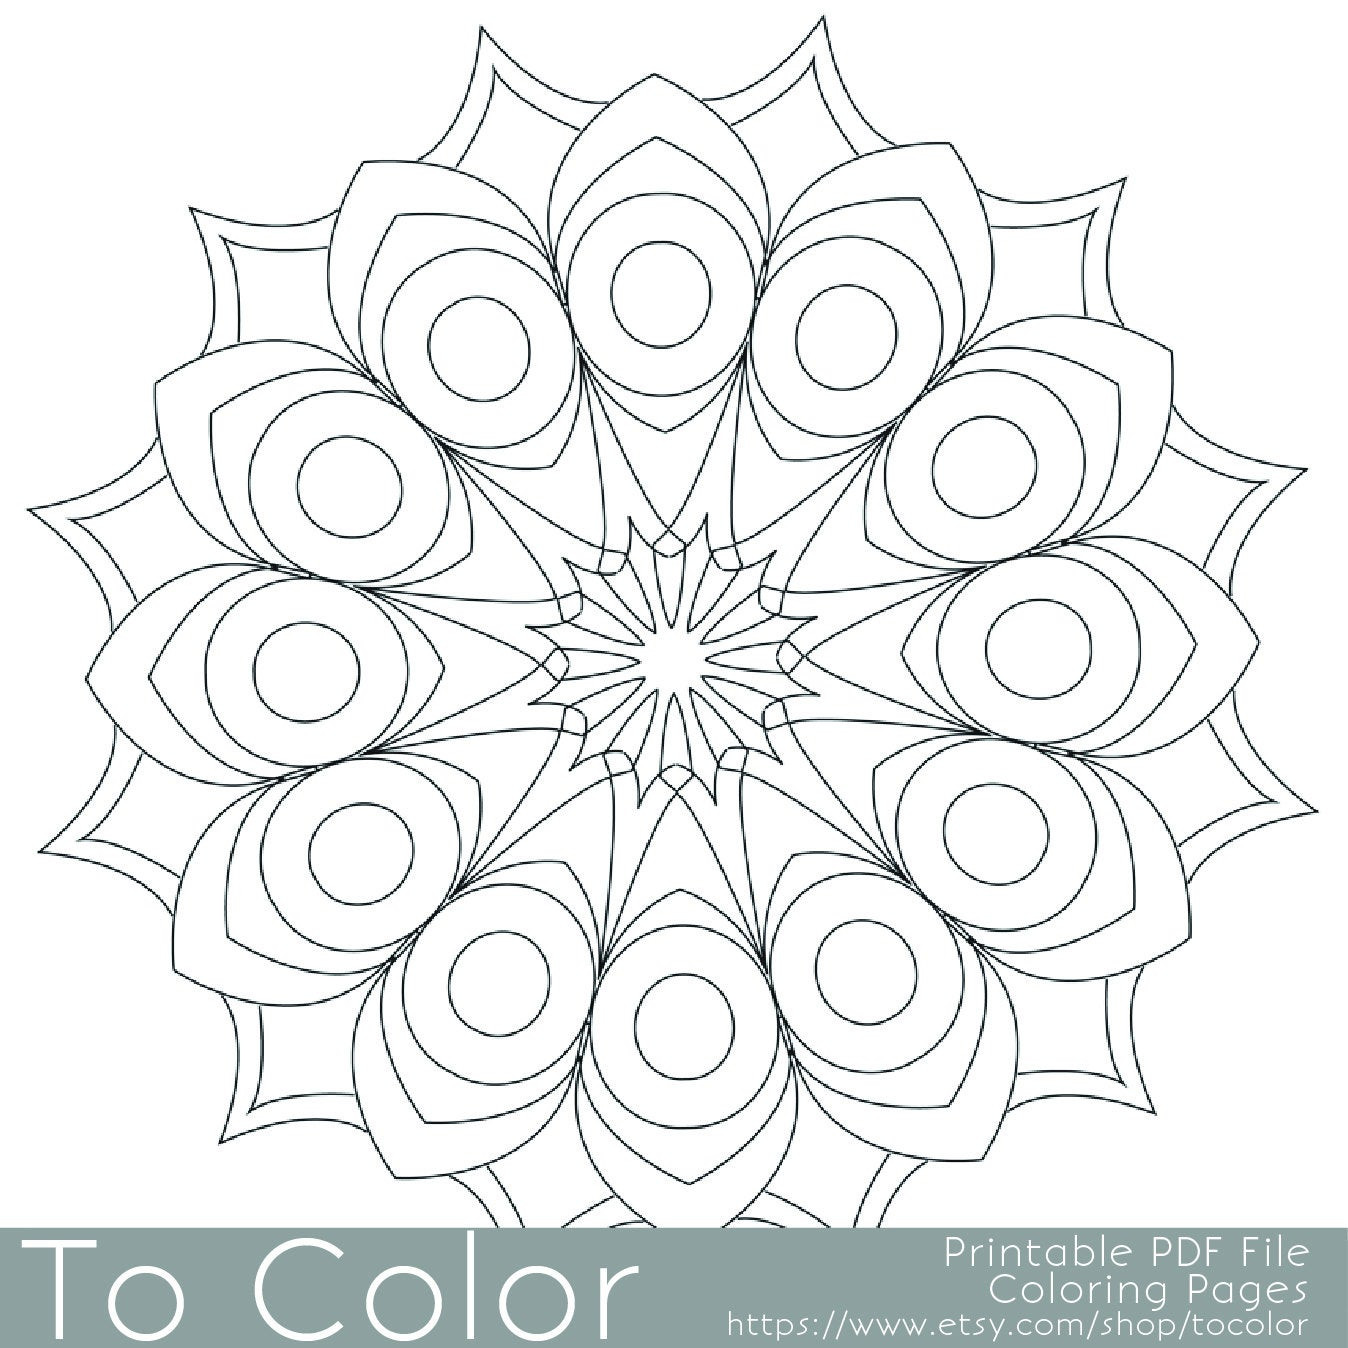 Simple Adult Coloring Books
 Printable Circular Mandala Easy Coloring Pages for Adults Big